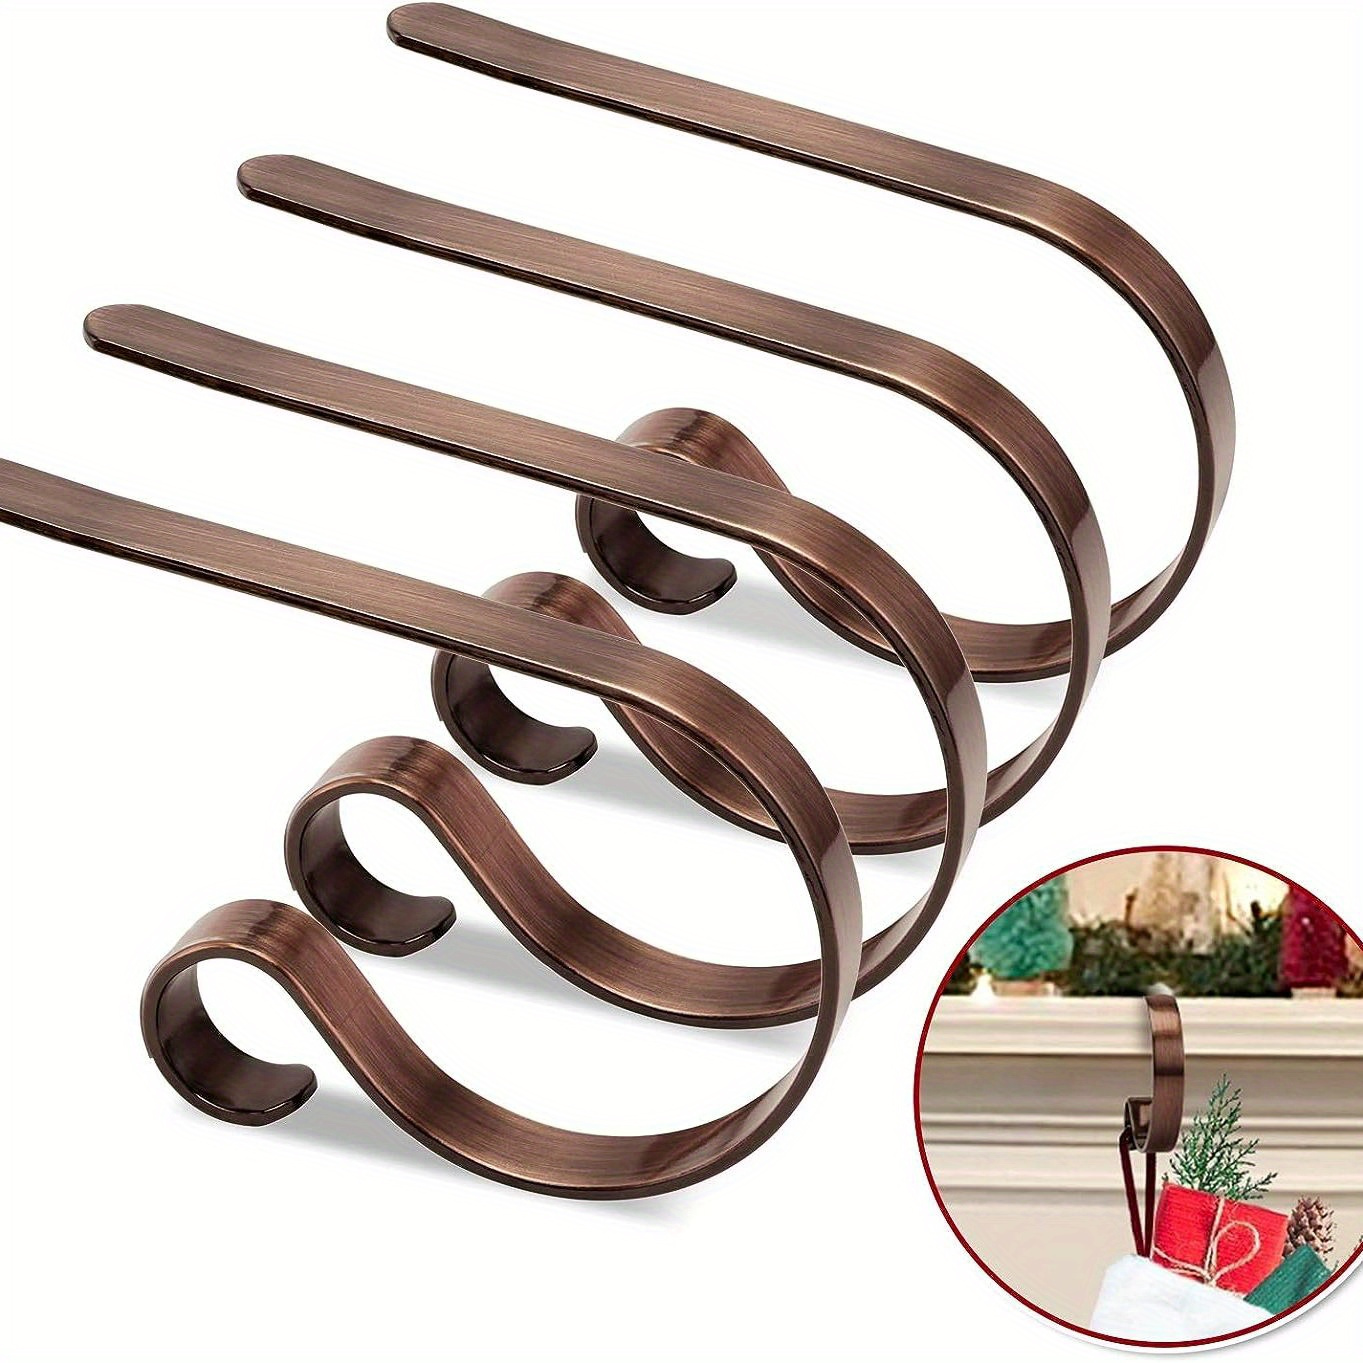 4pcs Christmas Stocking Holders Lightweight Stocking Hook No Slip Stocking  Hangers For Mantel Fireplace Hanging Adjustable Mantel Stocking Hanger  Christmas Wreath Hook Applicable For Ages 14 And Above